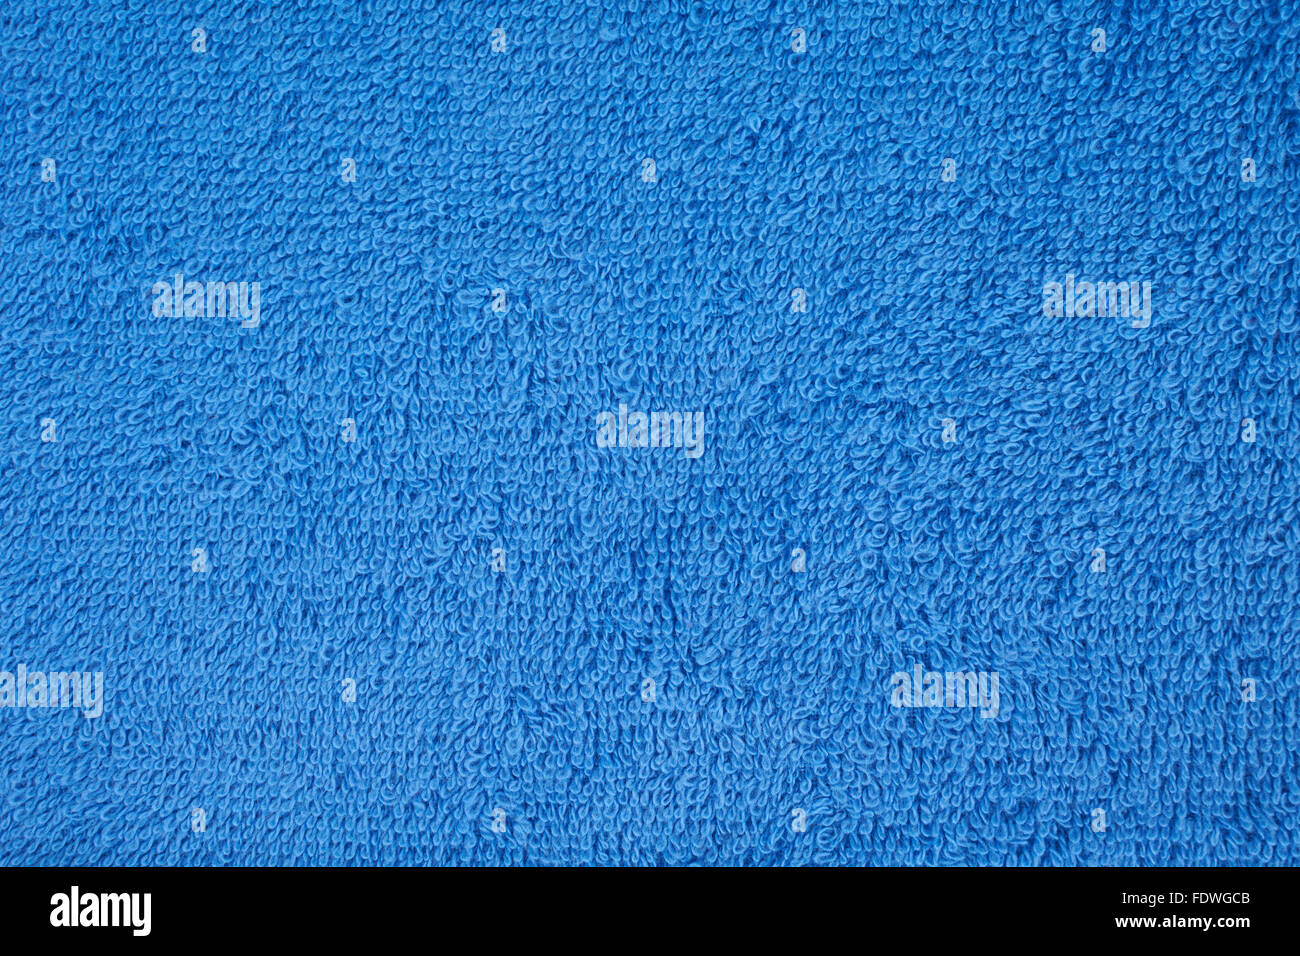 Blue terry towel as a seamless background Stock Photo